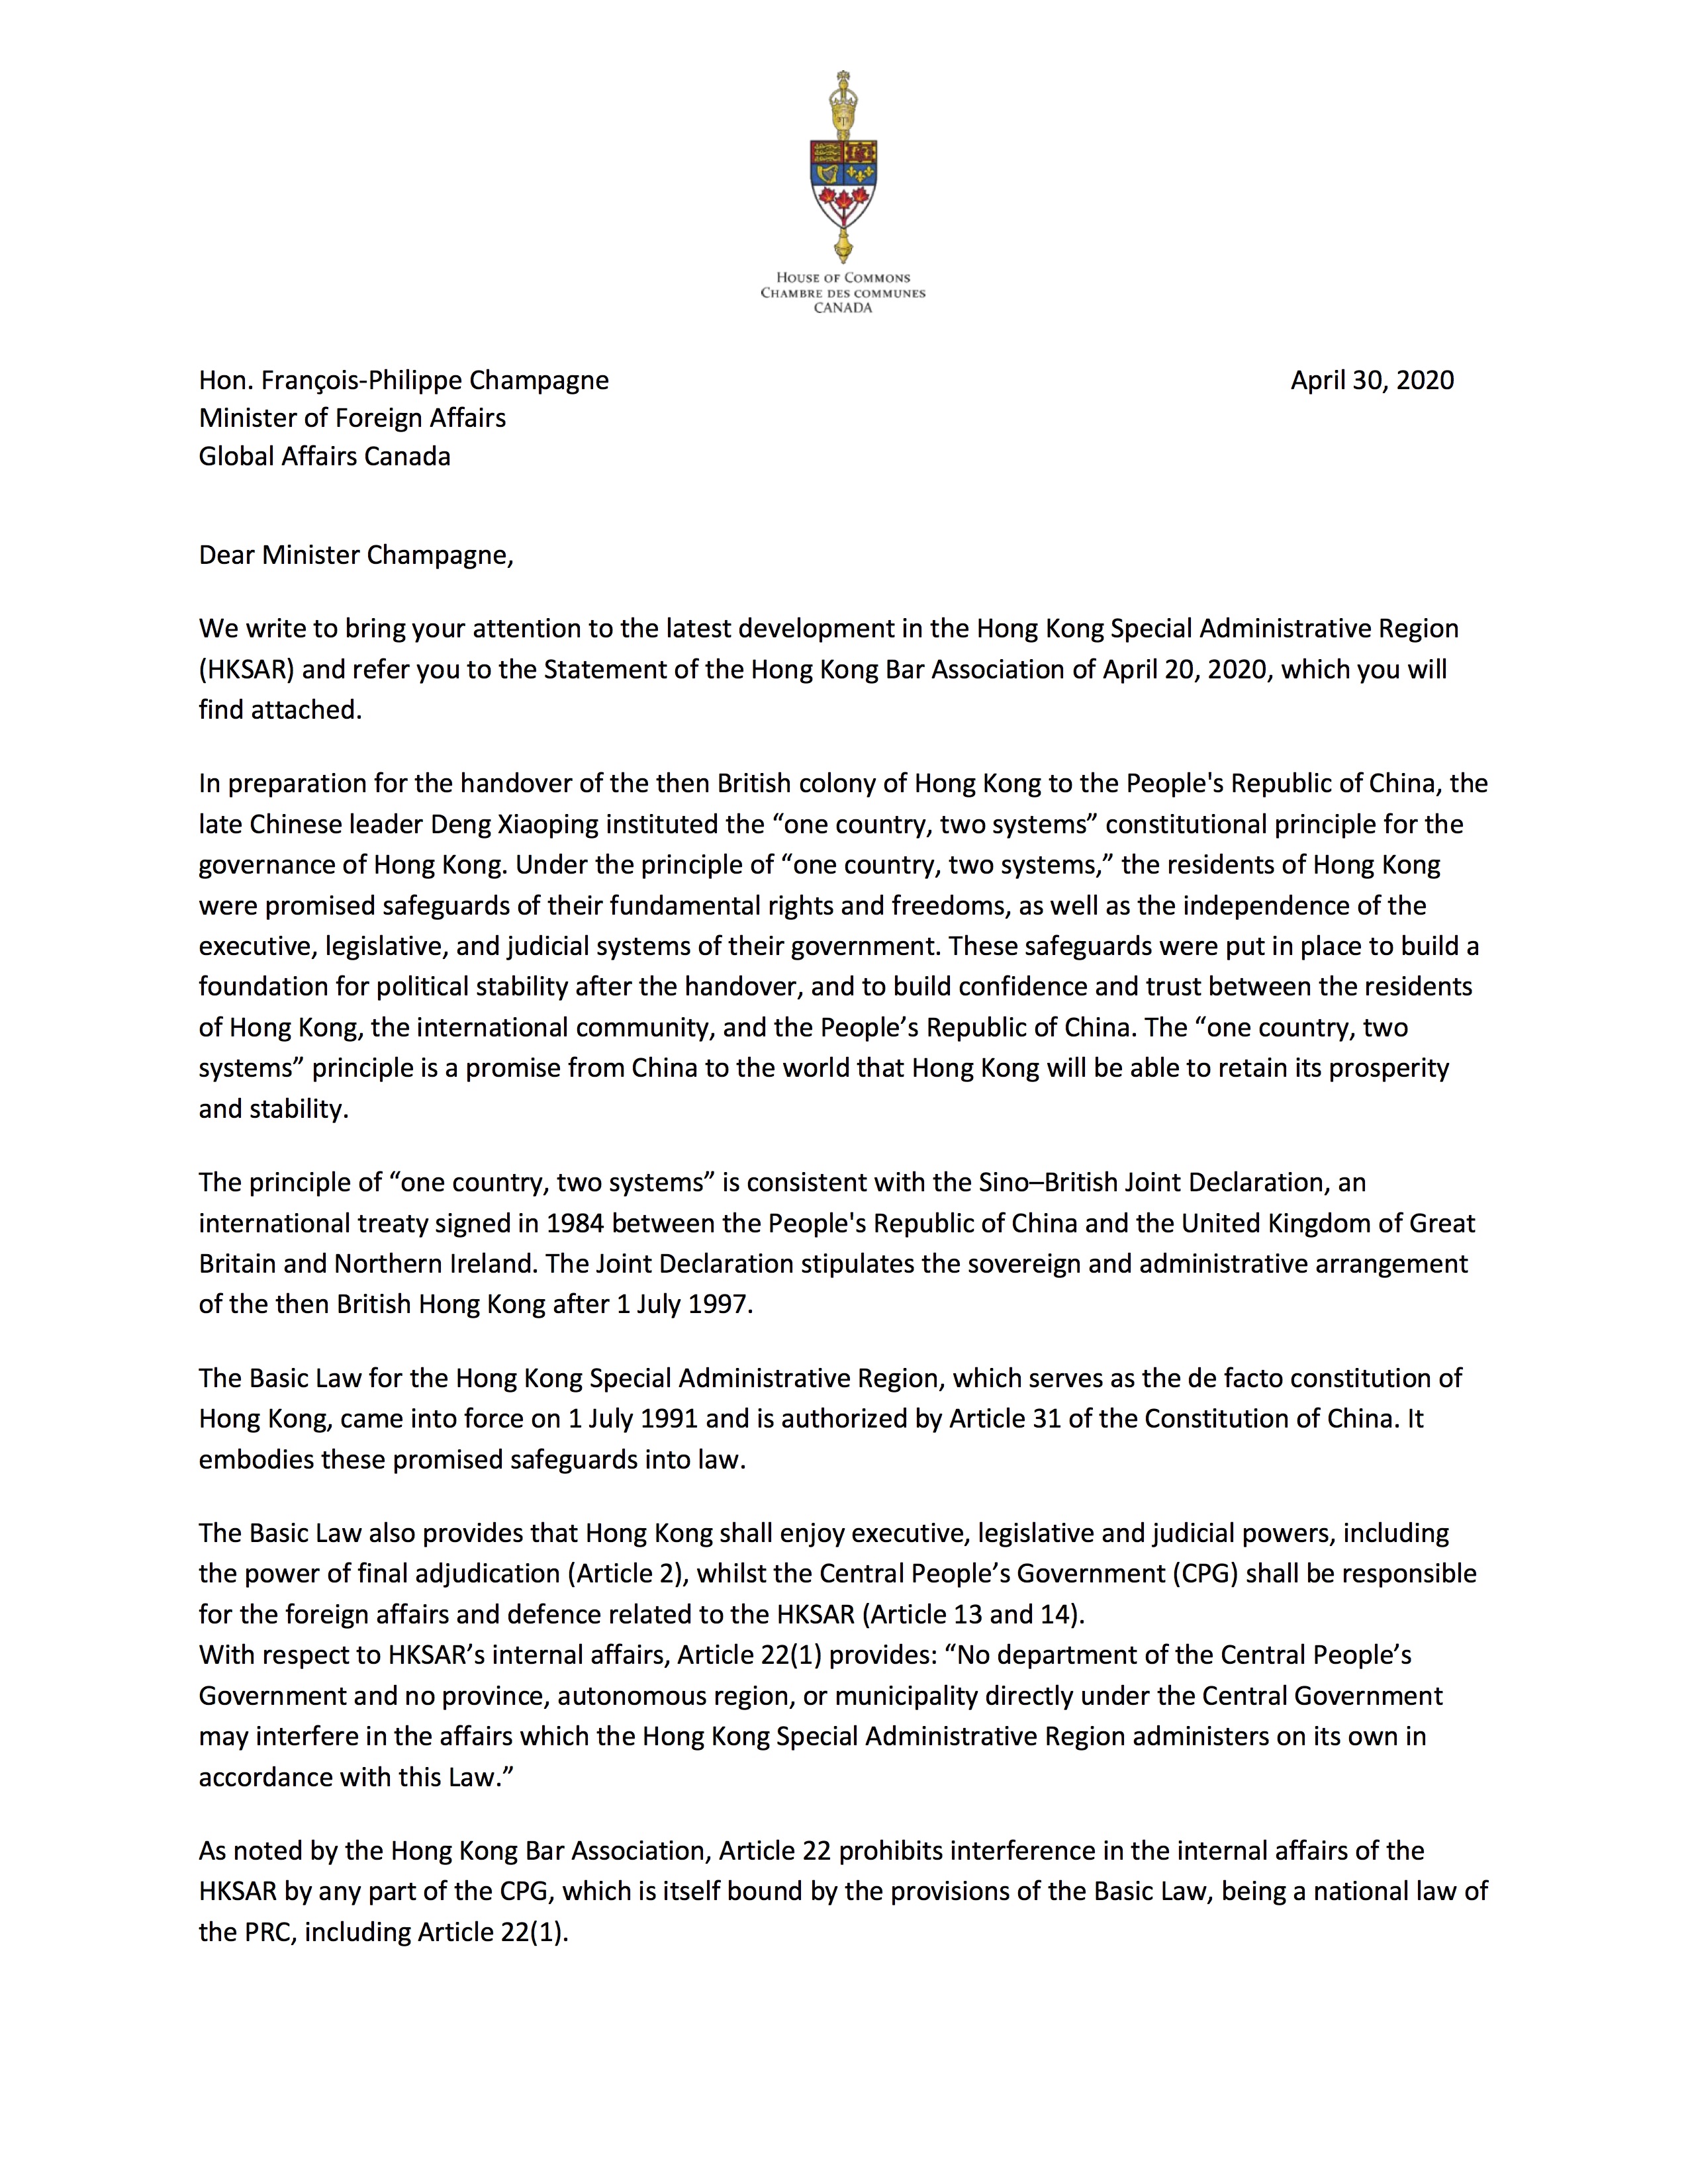 Letter to Minister Champagne Page 1